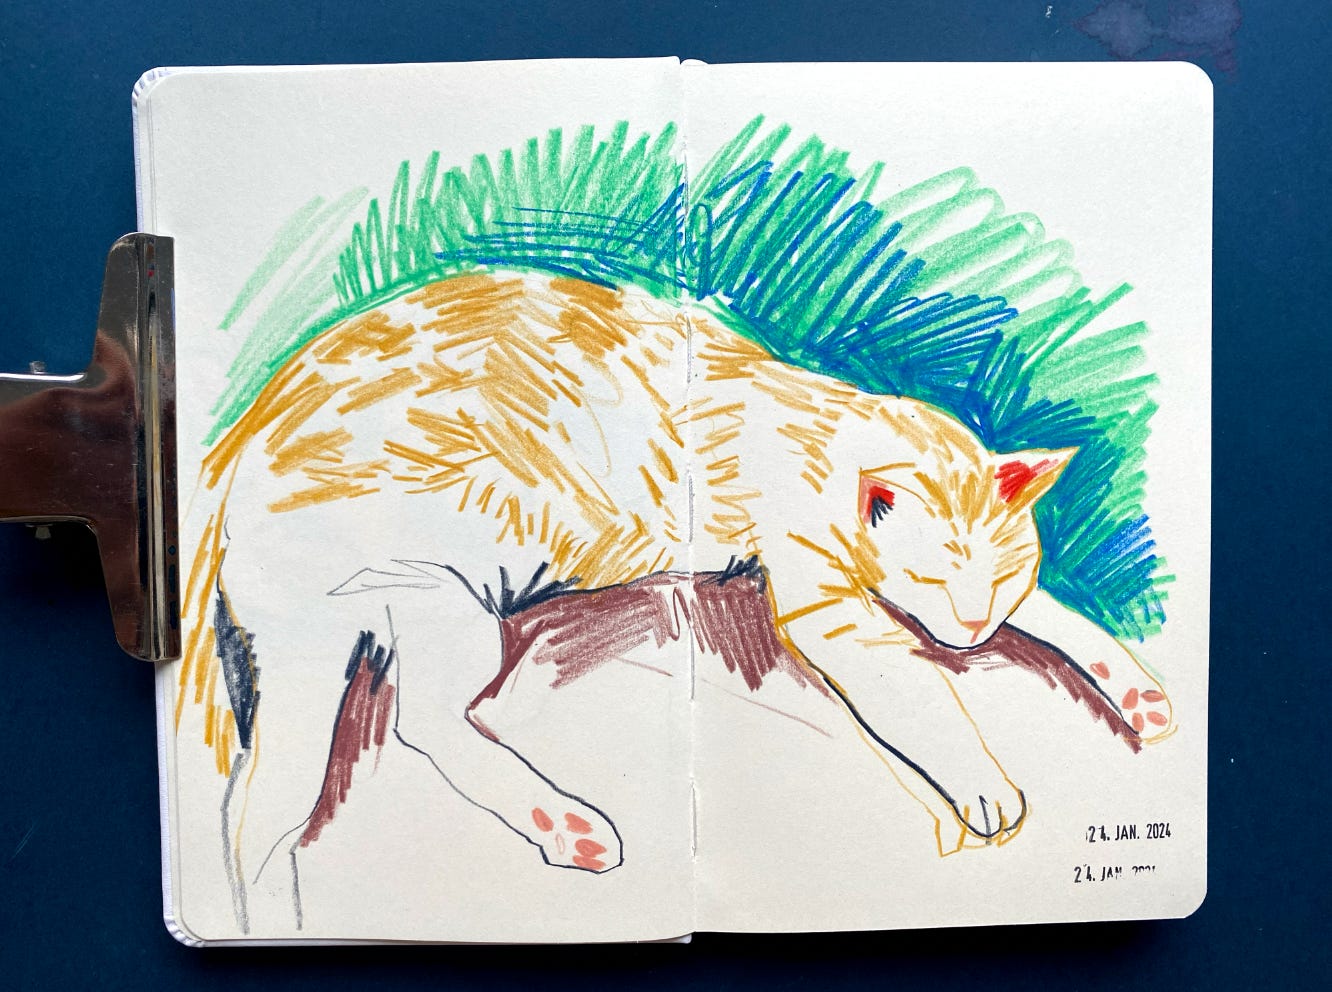 Colour pencil sketch of a cat in an open sketchbook against a blue background